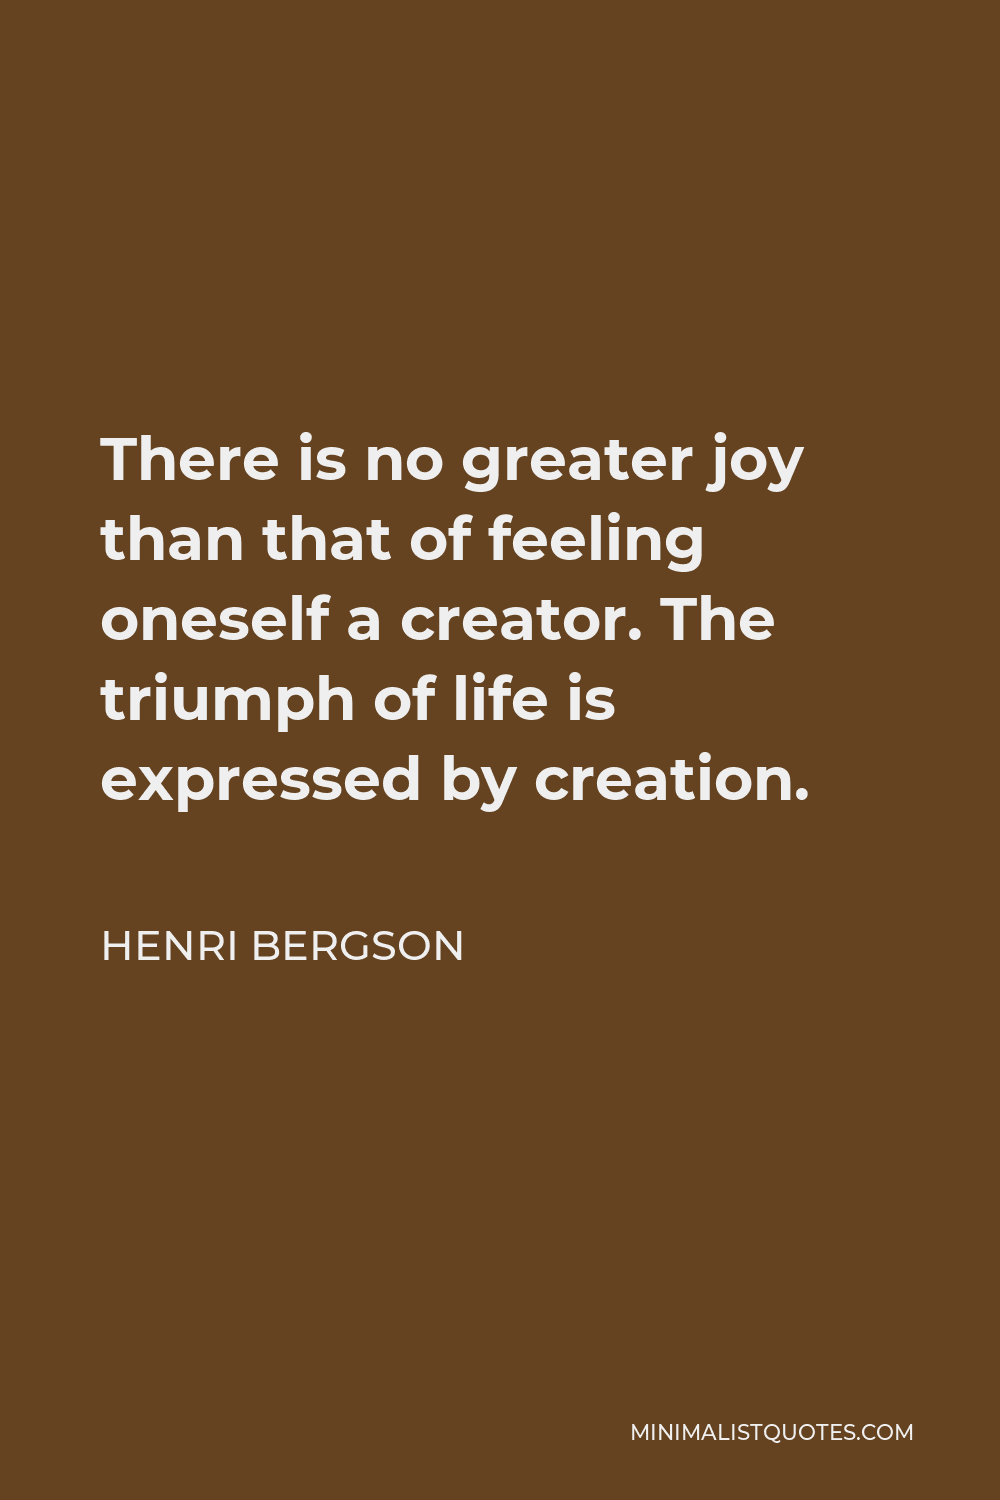 Henri Bergson Quote - There is no greater joy than that of feeling oneself a creator. The triumph of life is expressed by creation.